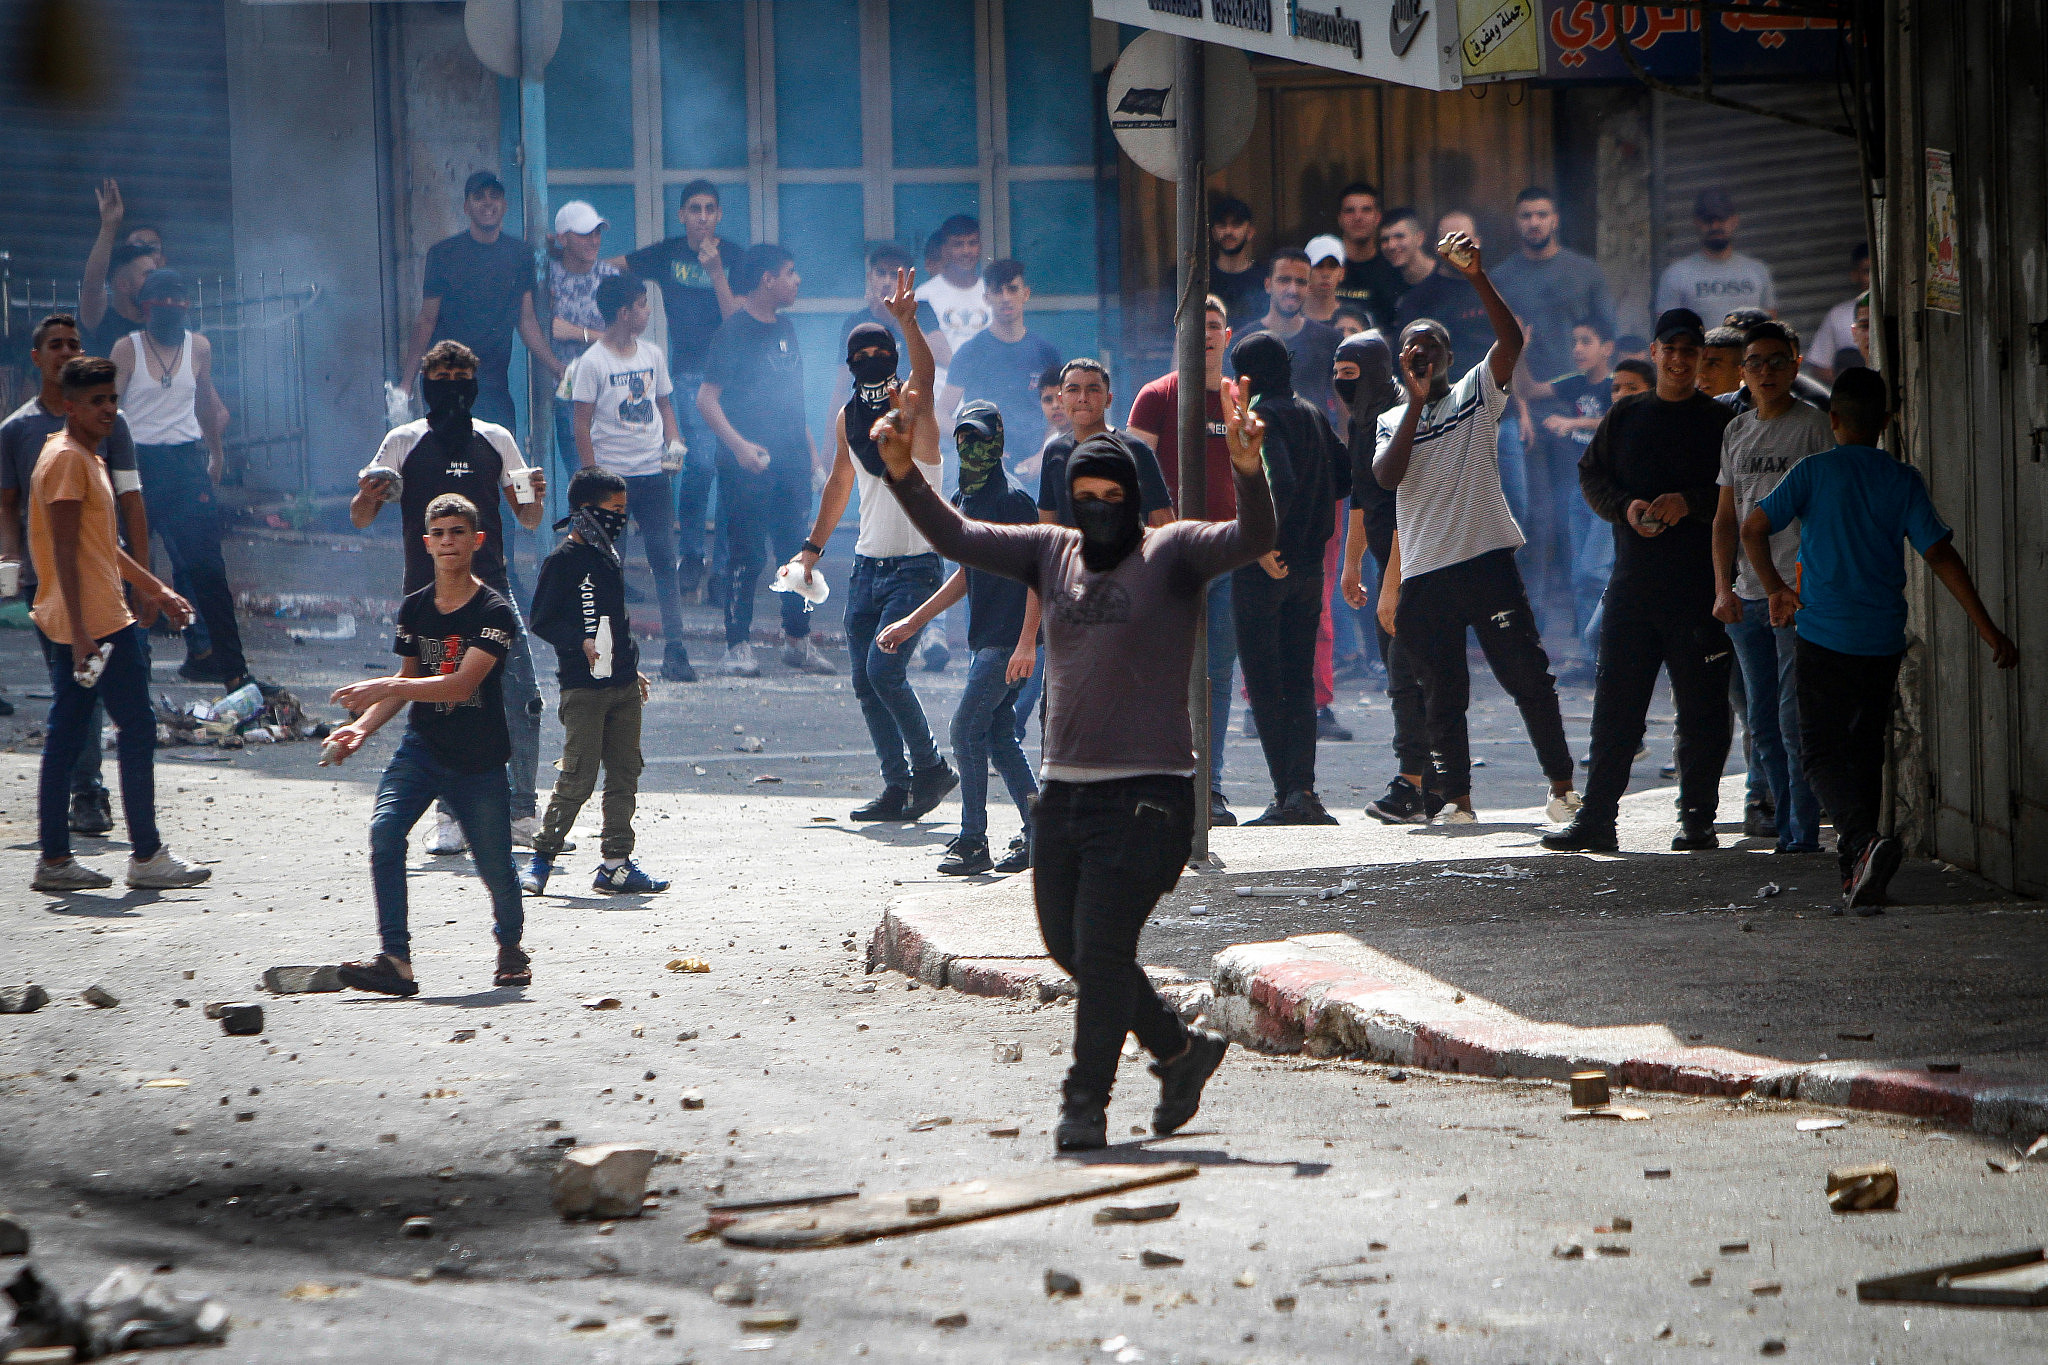 Palestinians clash with PA security forces in Nablus, in the West Bank on September 20, 2022, following the arrest of Hamas members by Palestinian security forces. (Nasser Ishtayeh/Flash90)